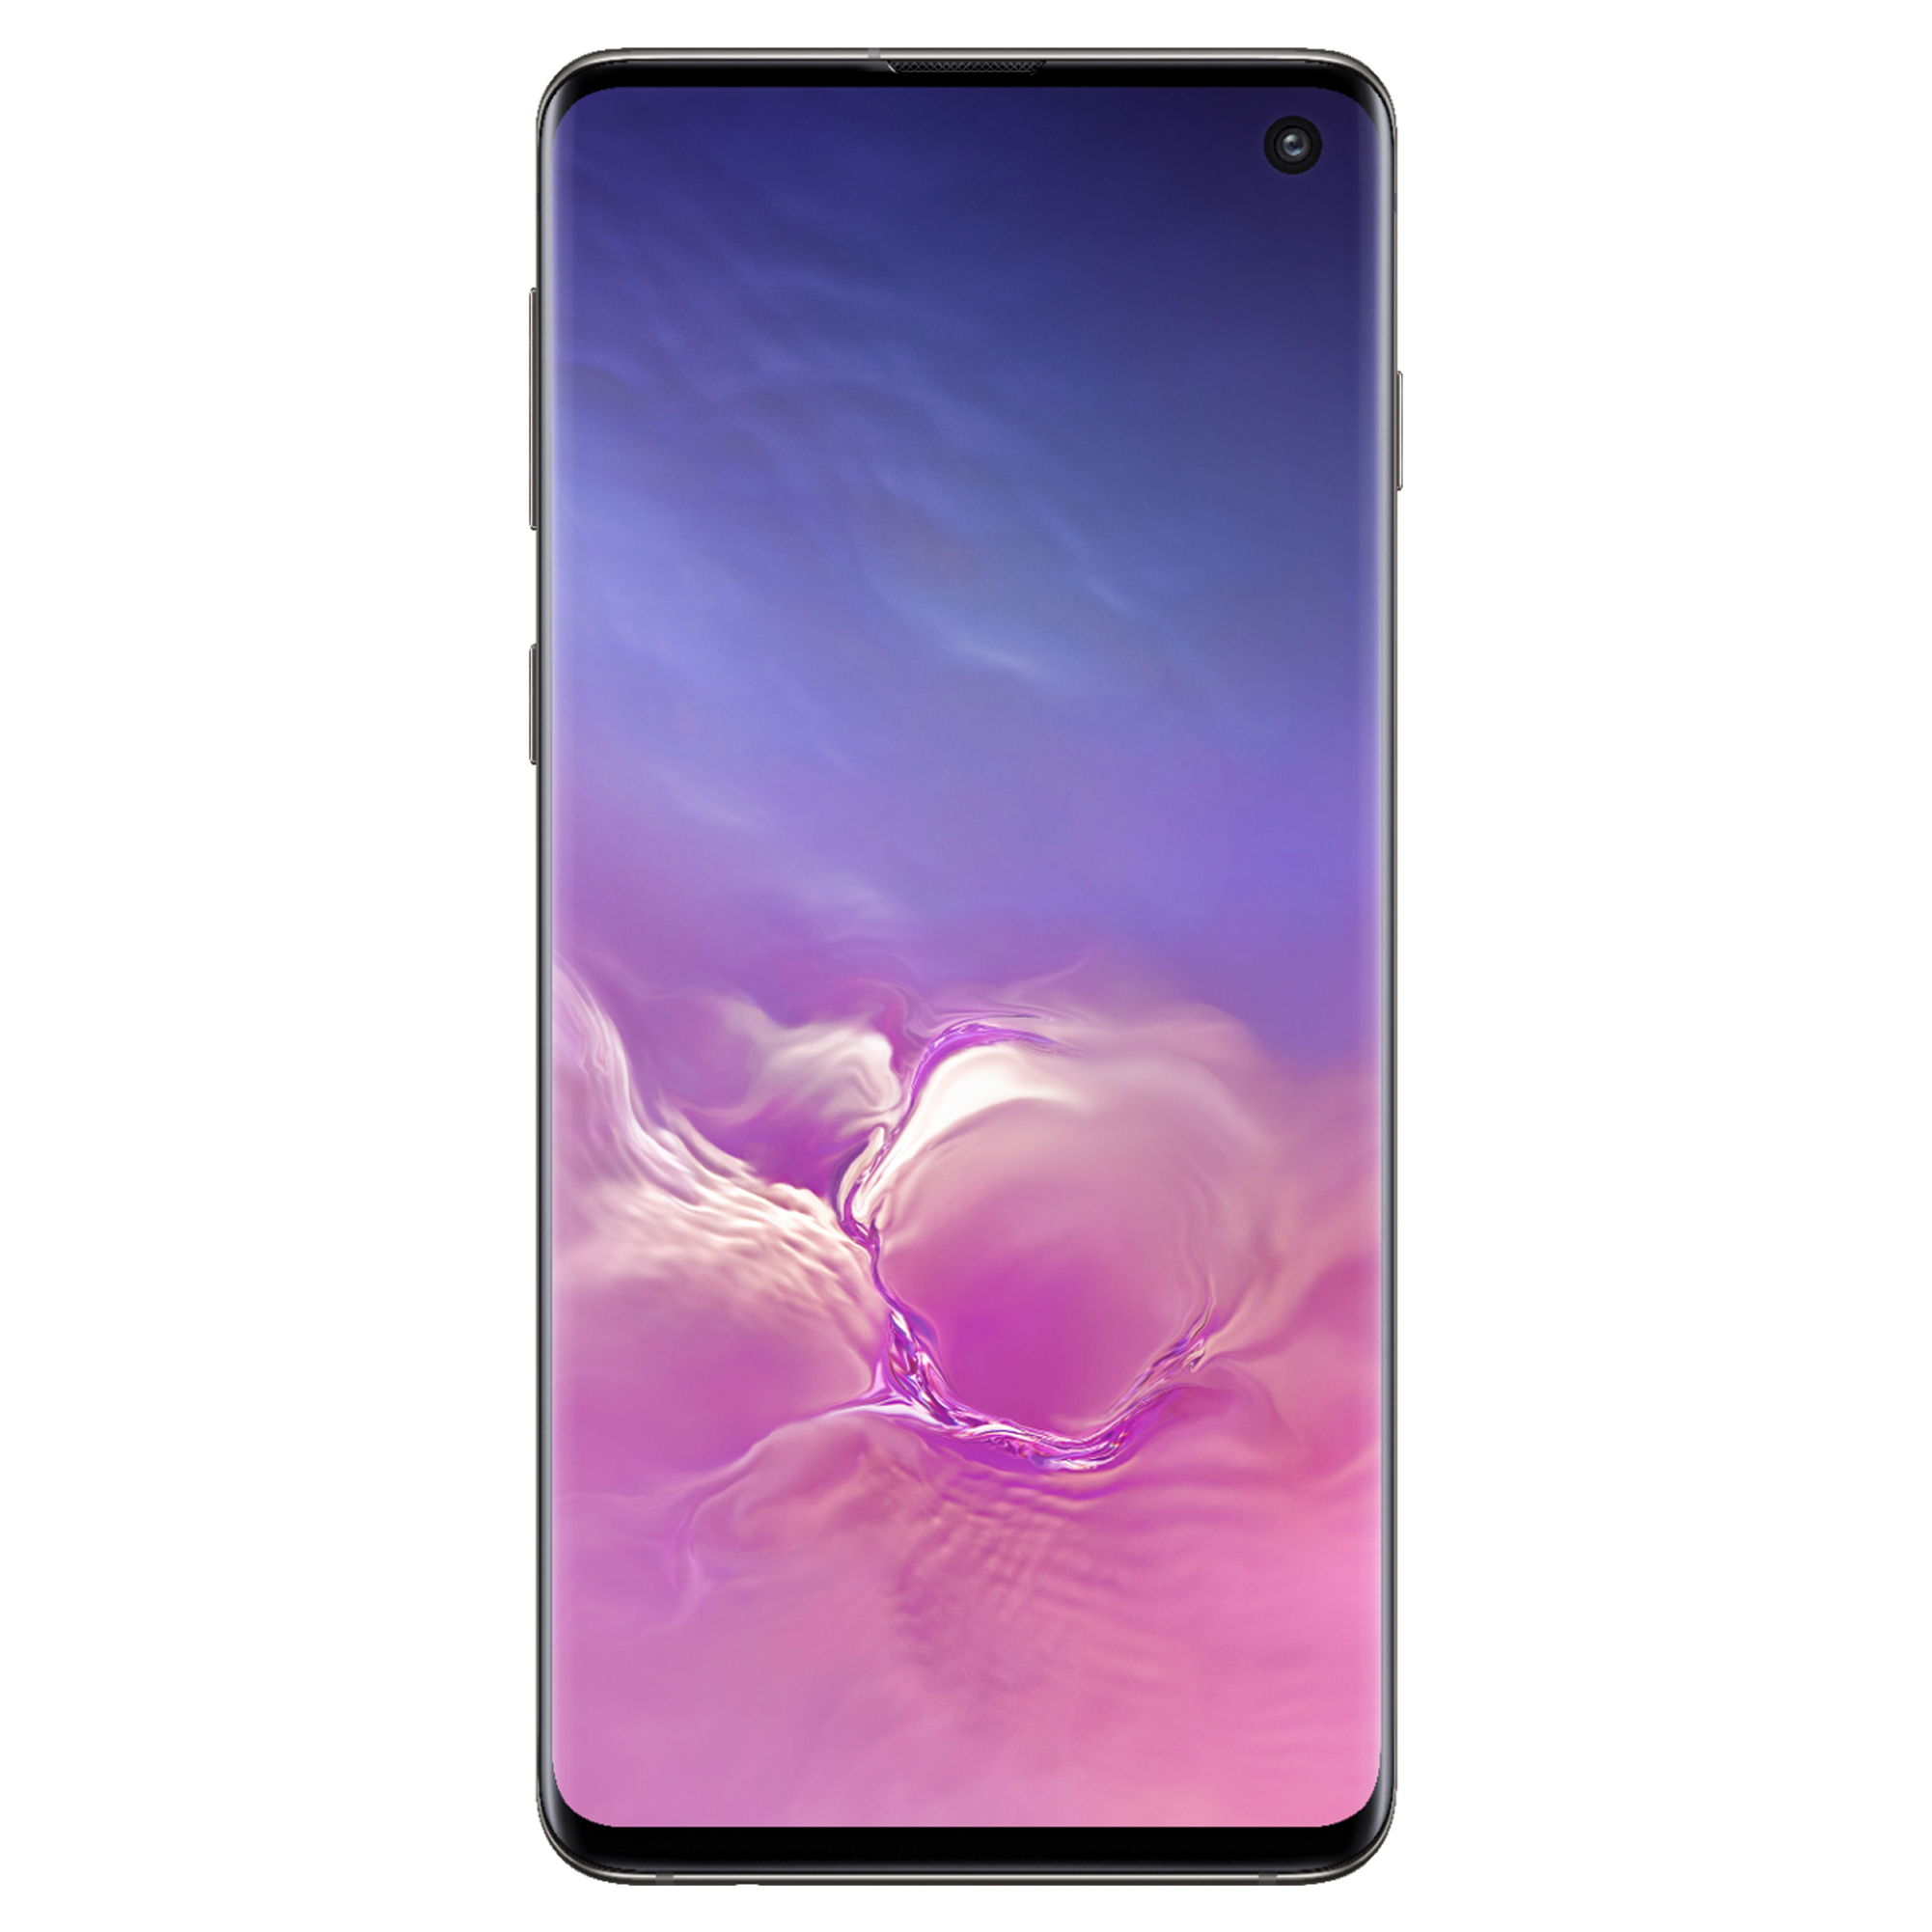 Restored SAMSUNG G973 Galaxy S10, 128 GB, Prism Black - Fully Unlocked - GSM and CDMA Compatible (Refurbished) - image 2 of 7